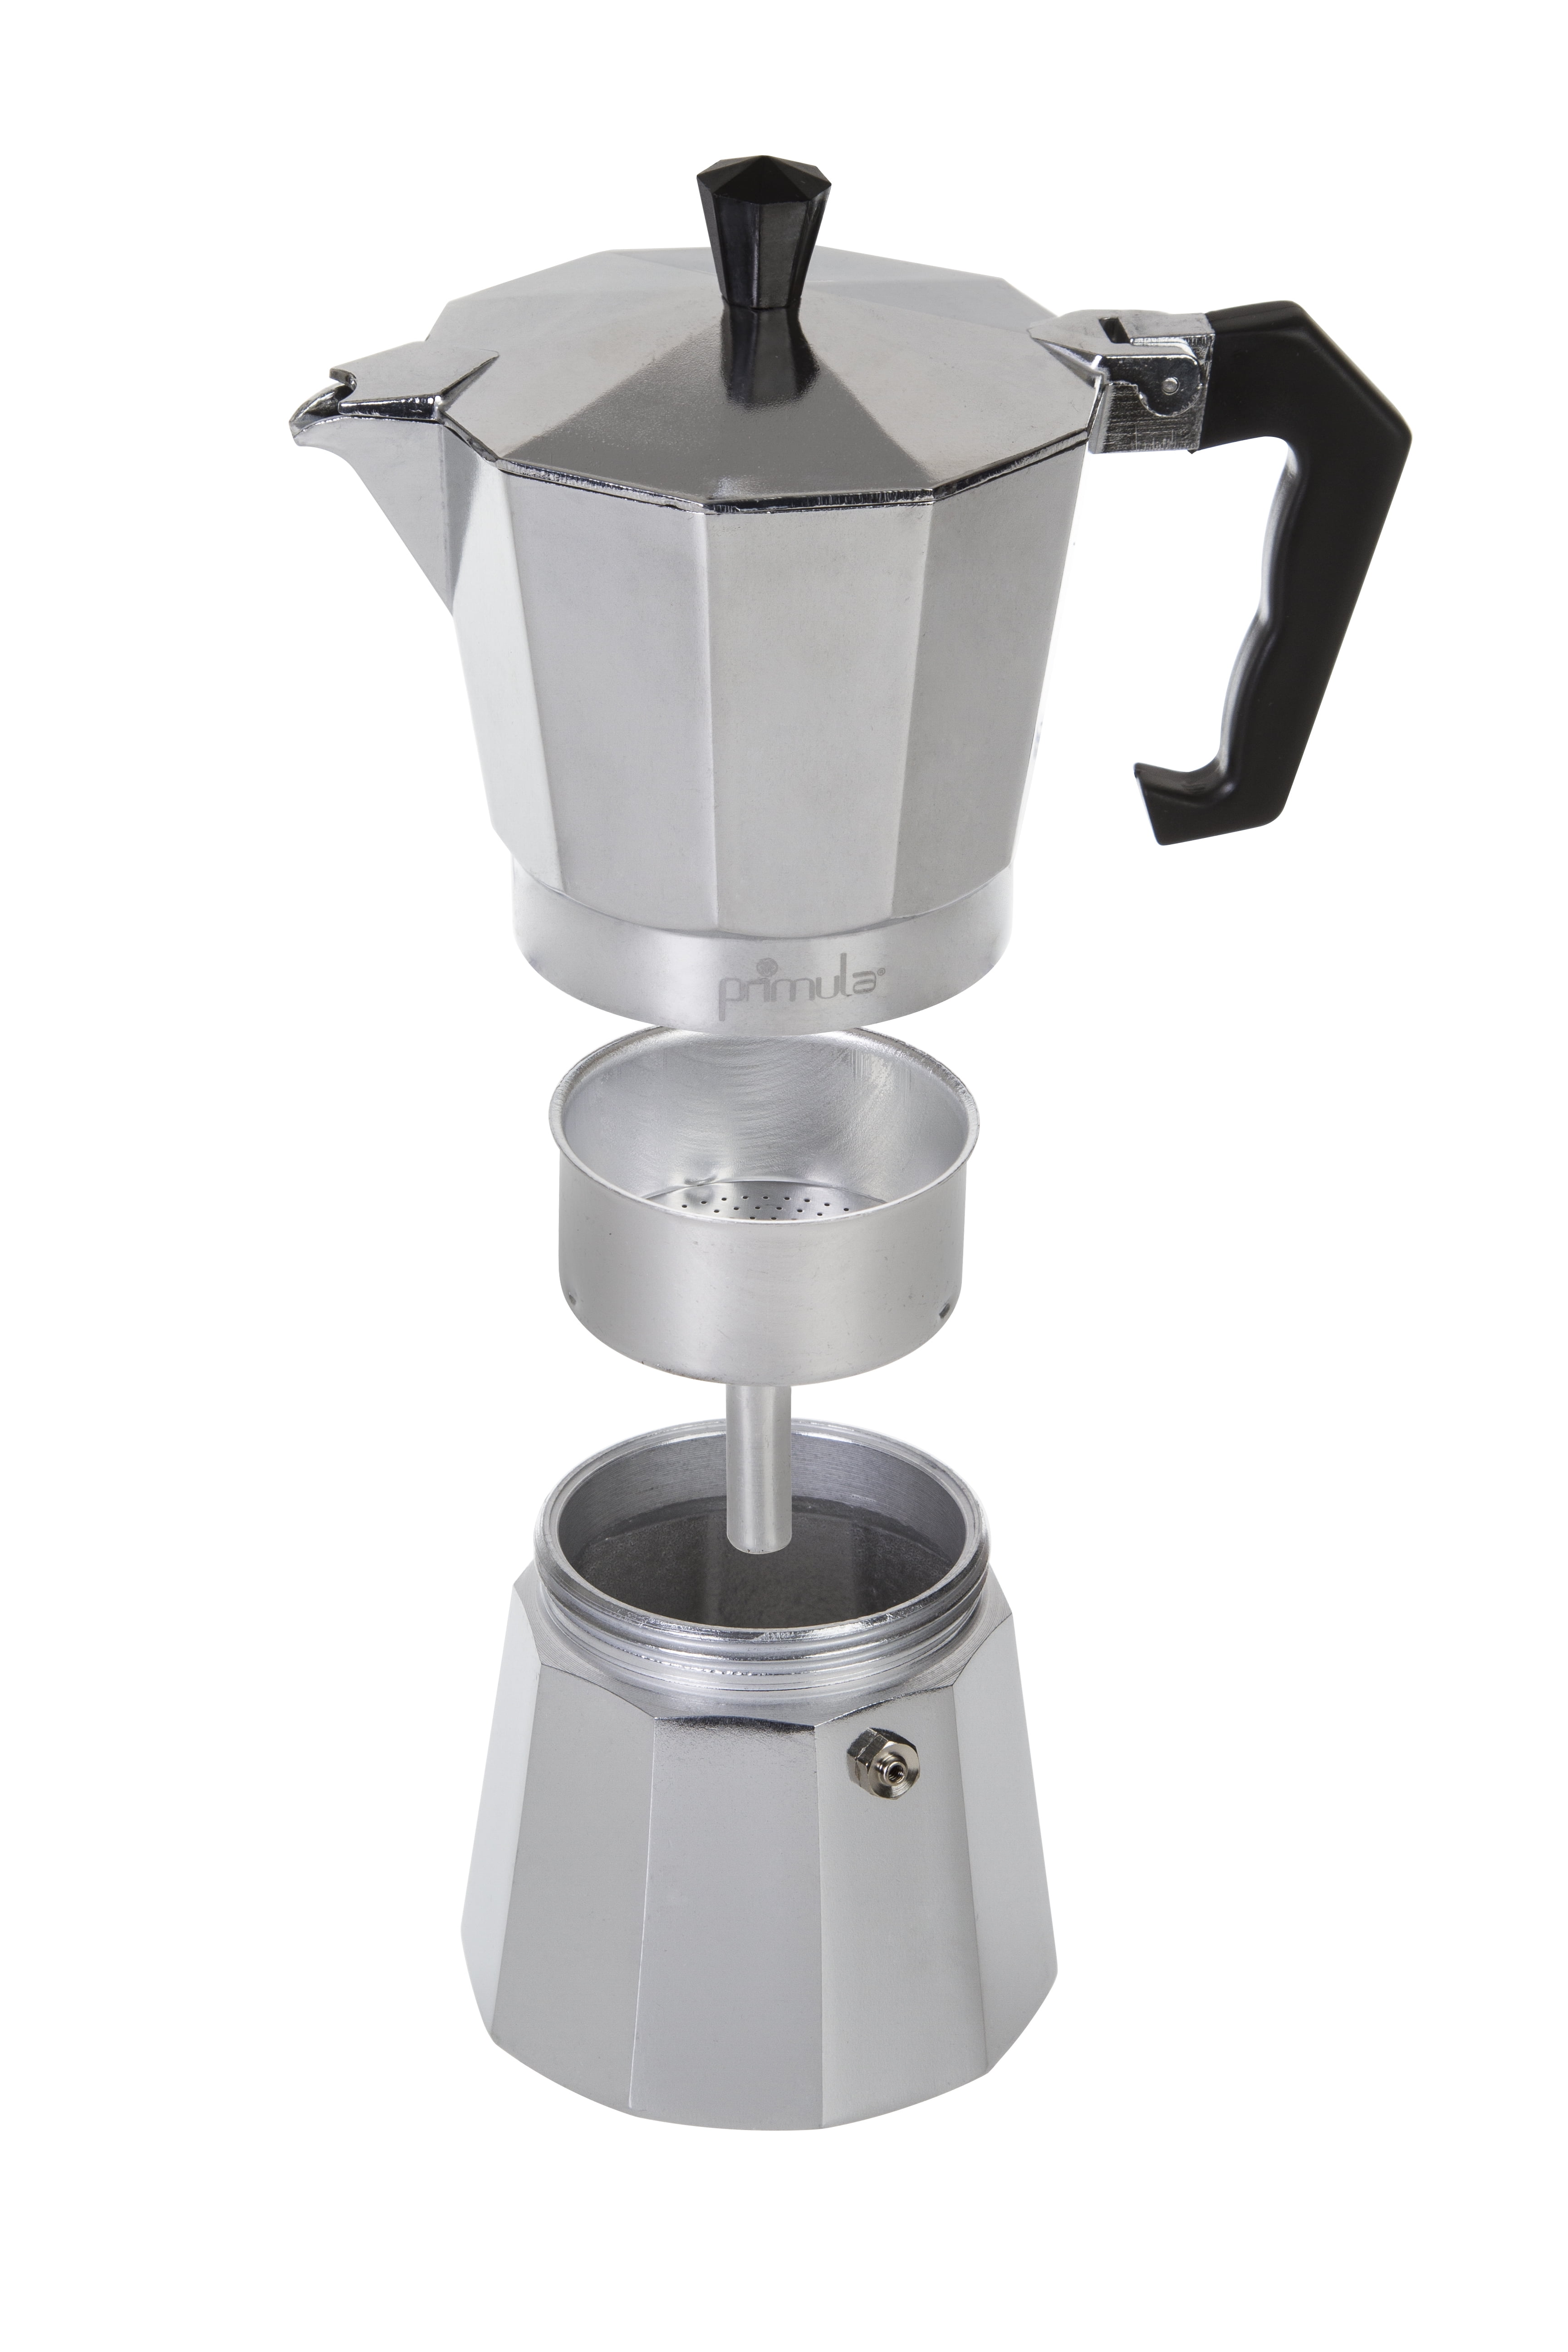 Primula Espresso Coffee Maker 3 Cup Portable Stove Top Backpacking Camping  Home